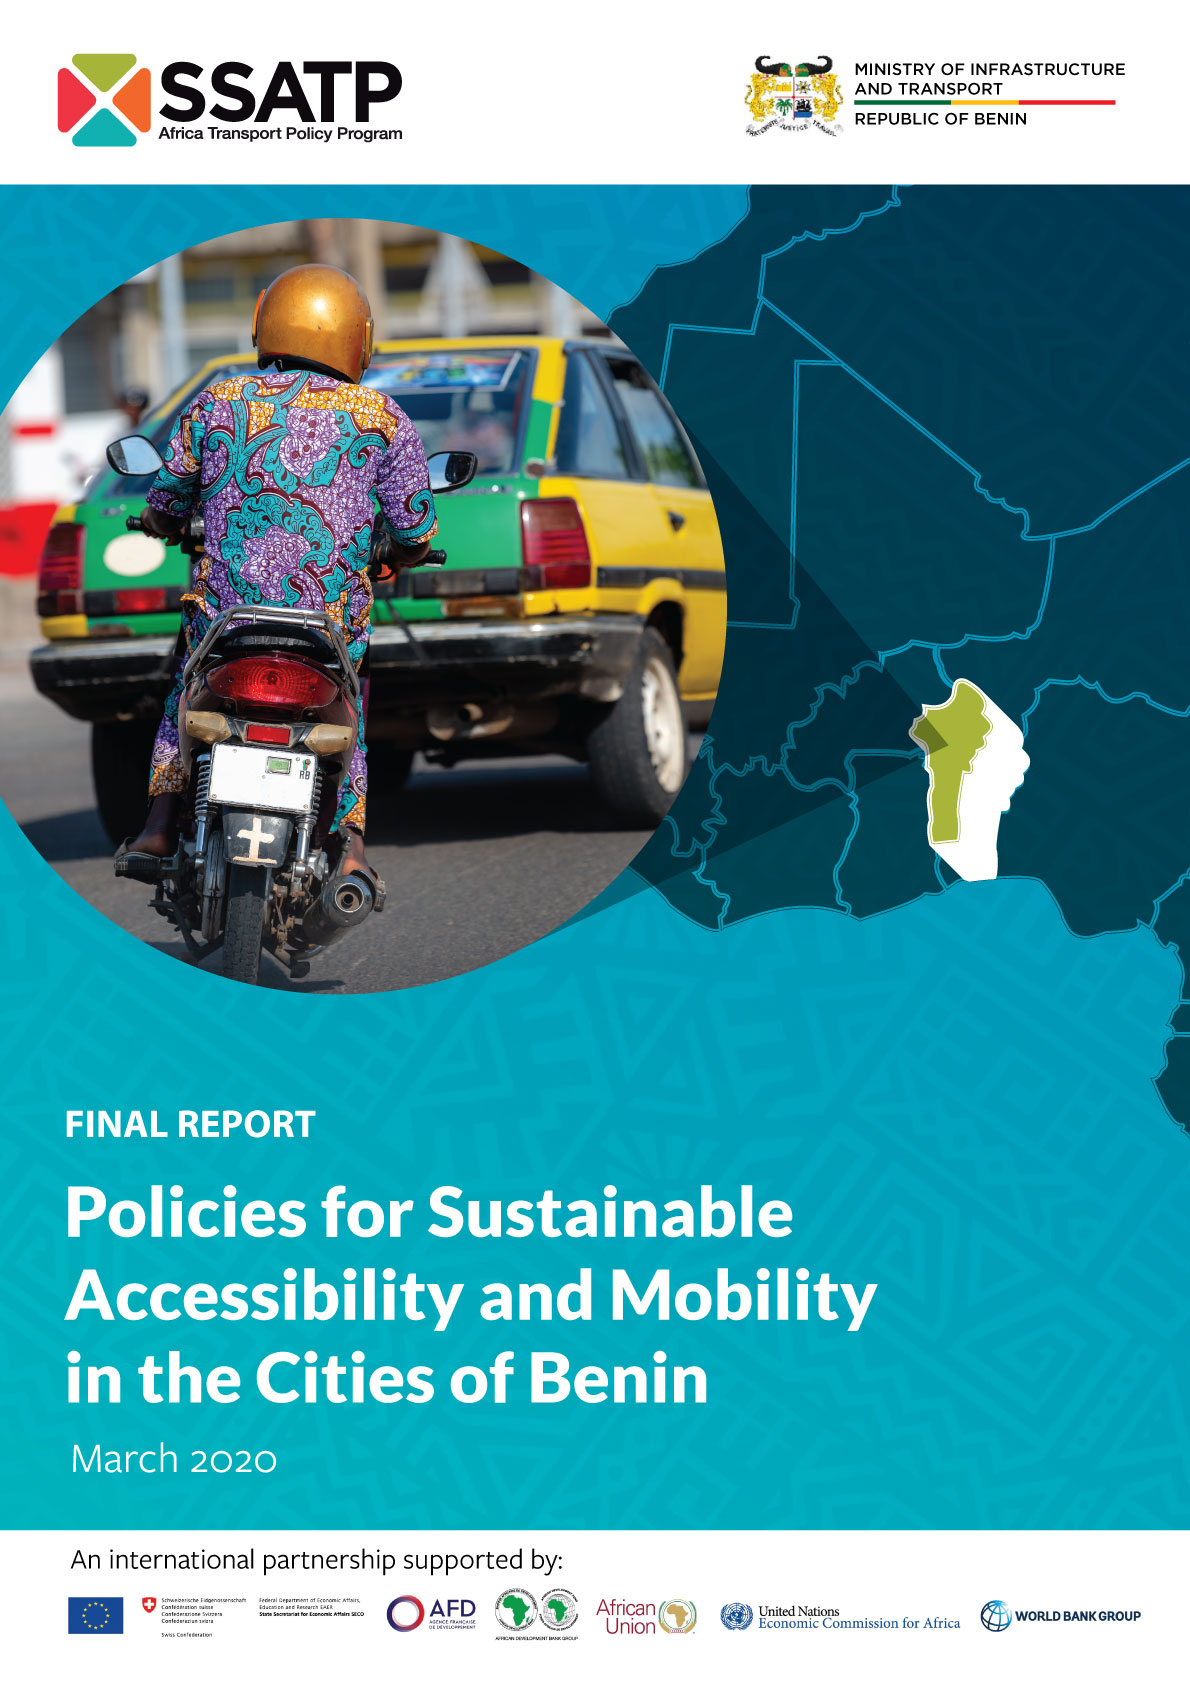 Policies for Sustainable Accessibility and Mobility in the Cities of Benin - Policy & Strategy Paper